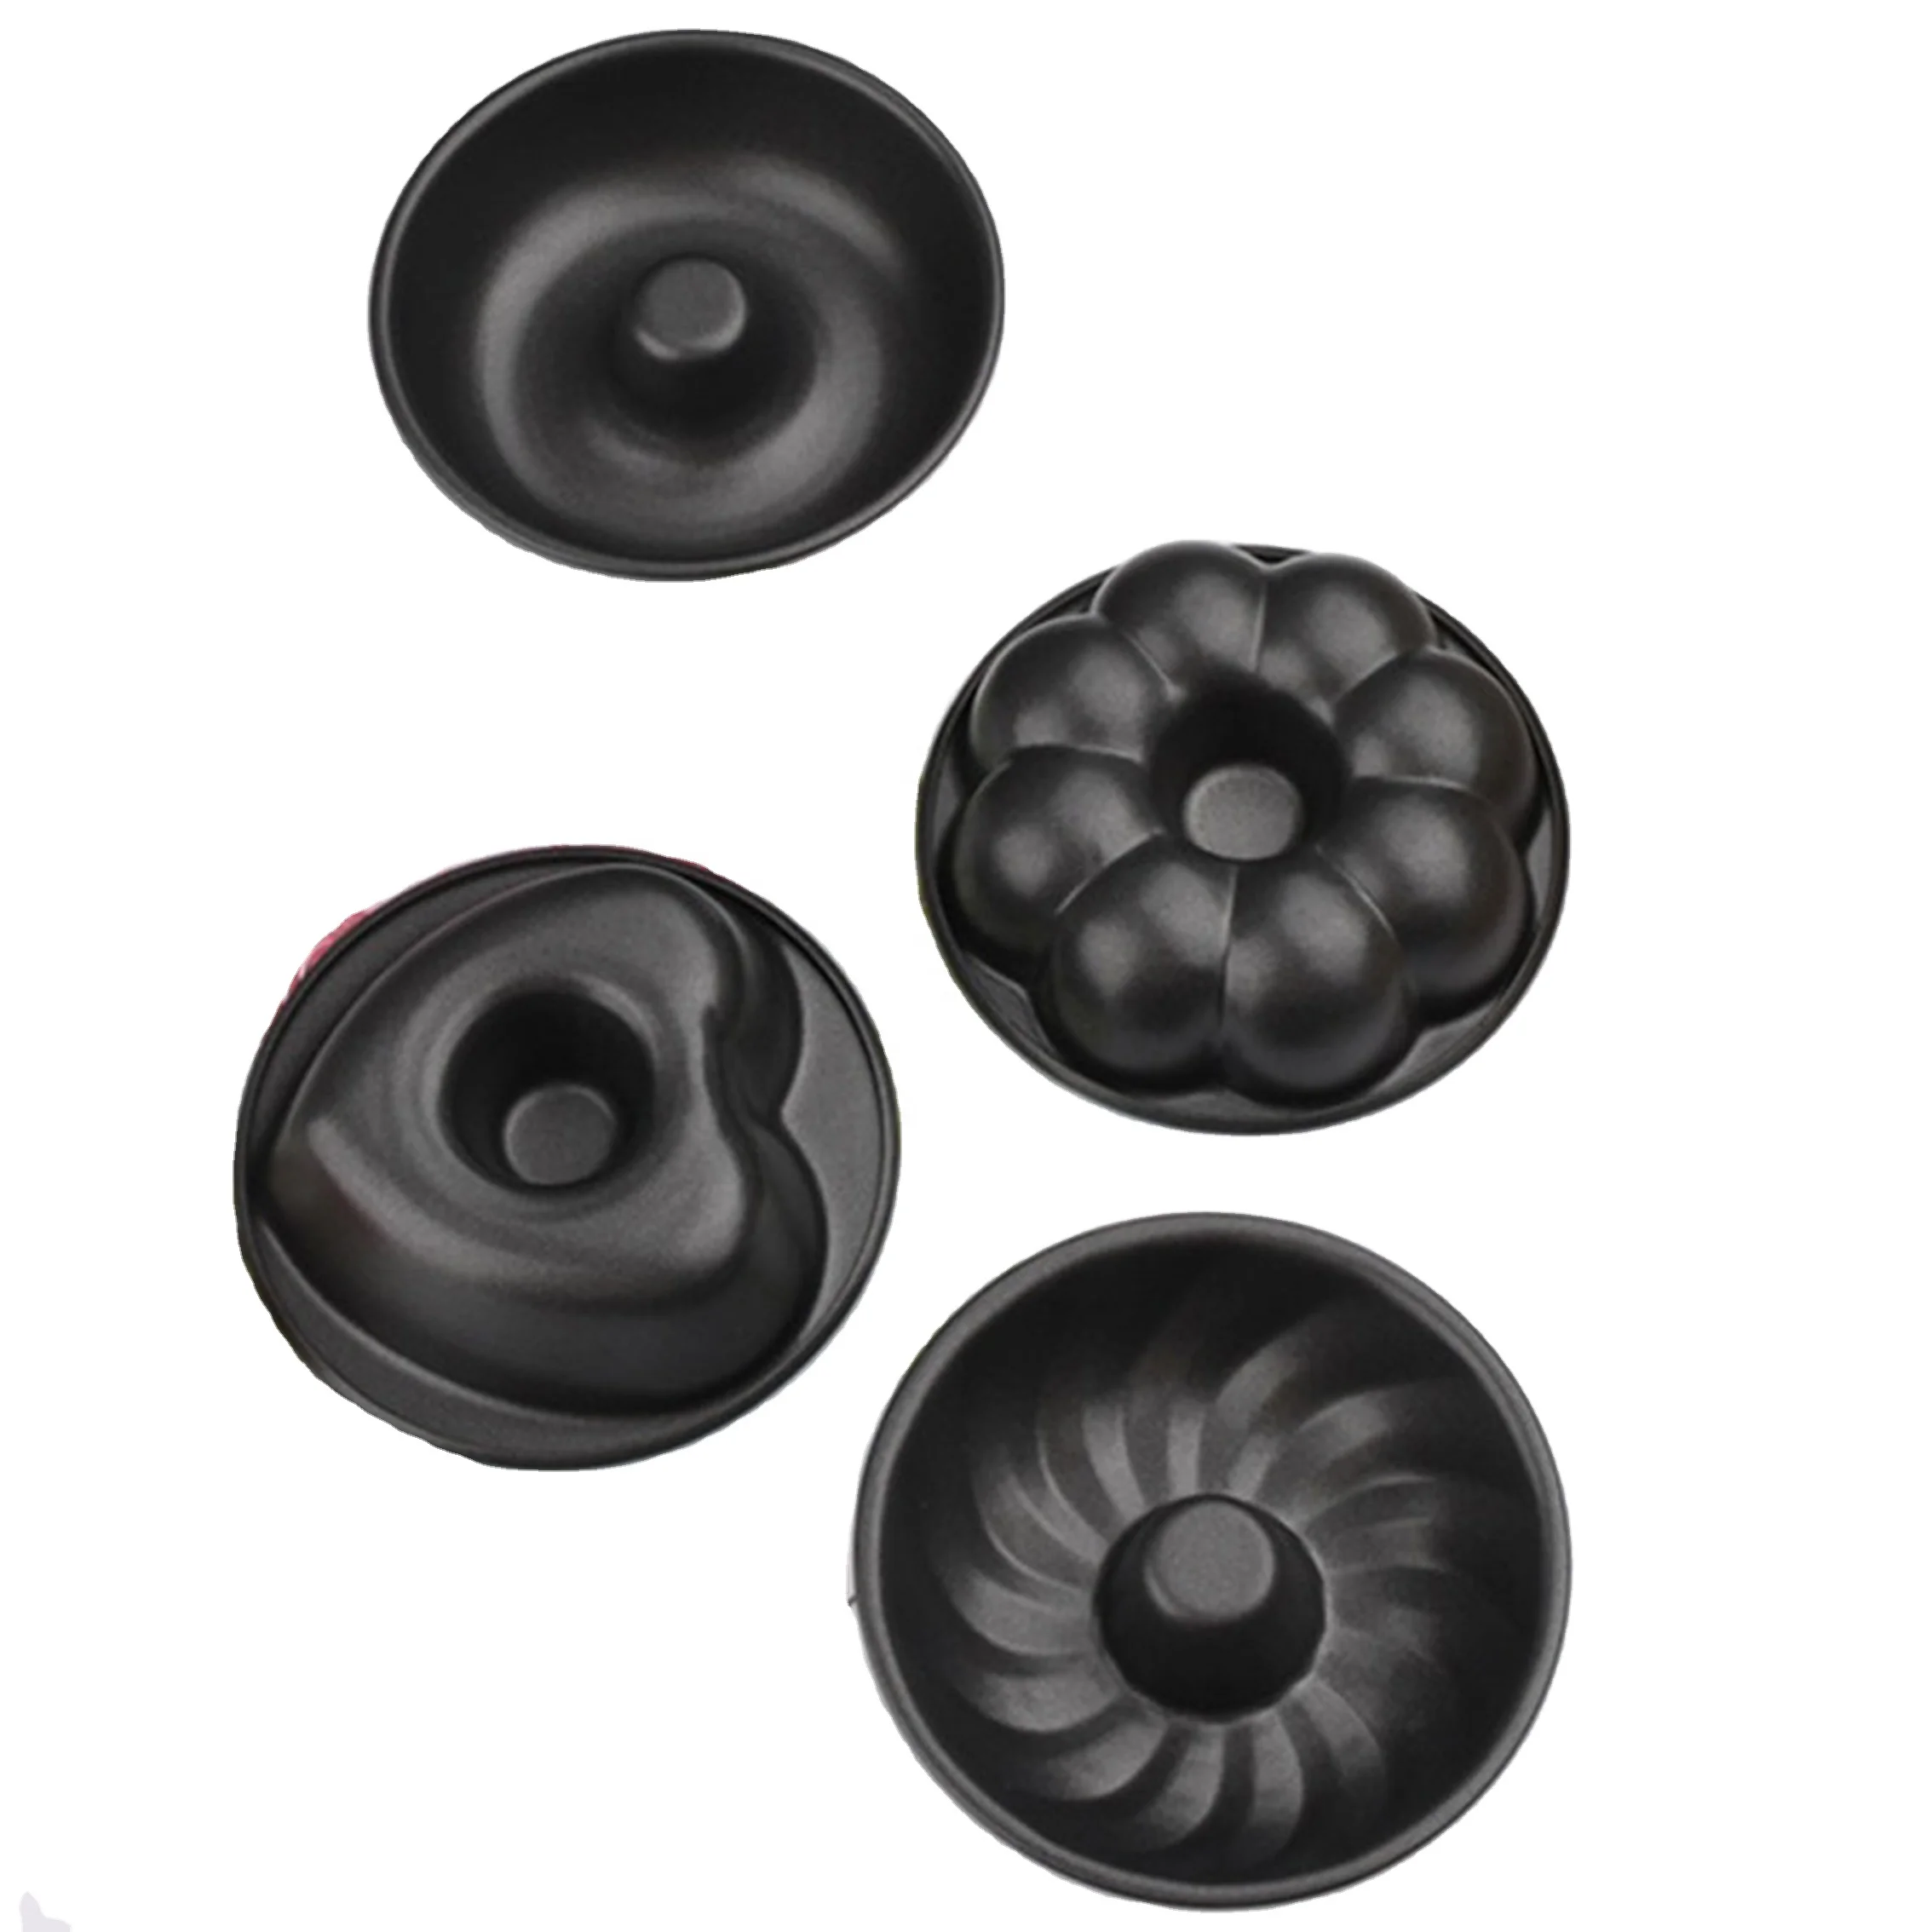 New Design 3Inch Mini Round Non Stick Donut Chiffon Cake Mold Baking Tray Pans For Diy Food Homemade Kitchen Accessories